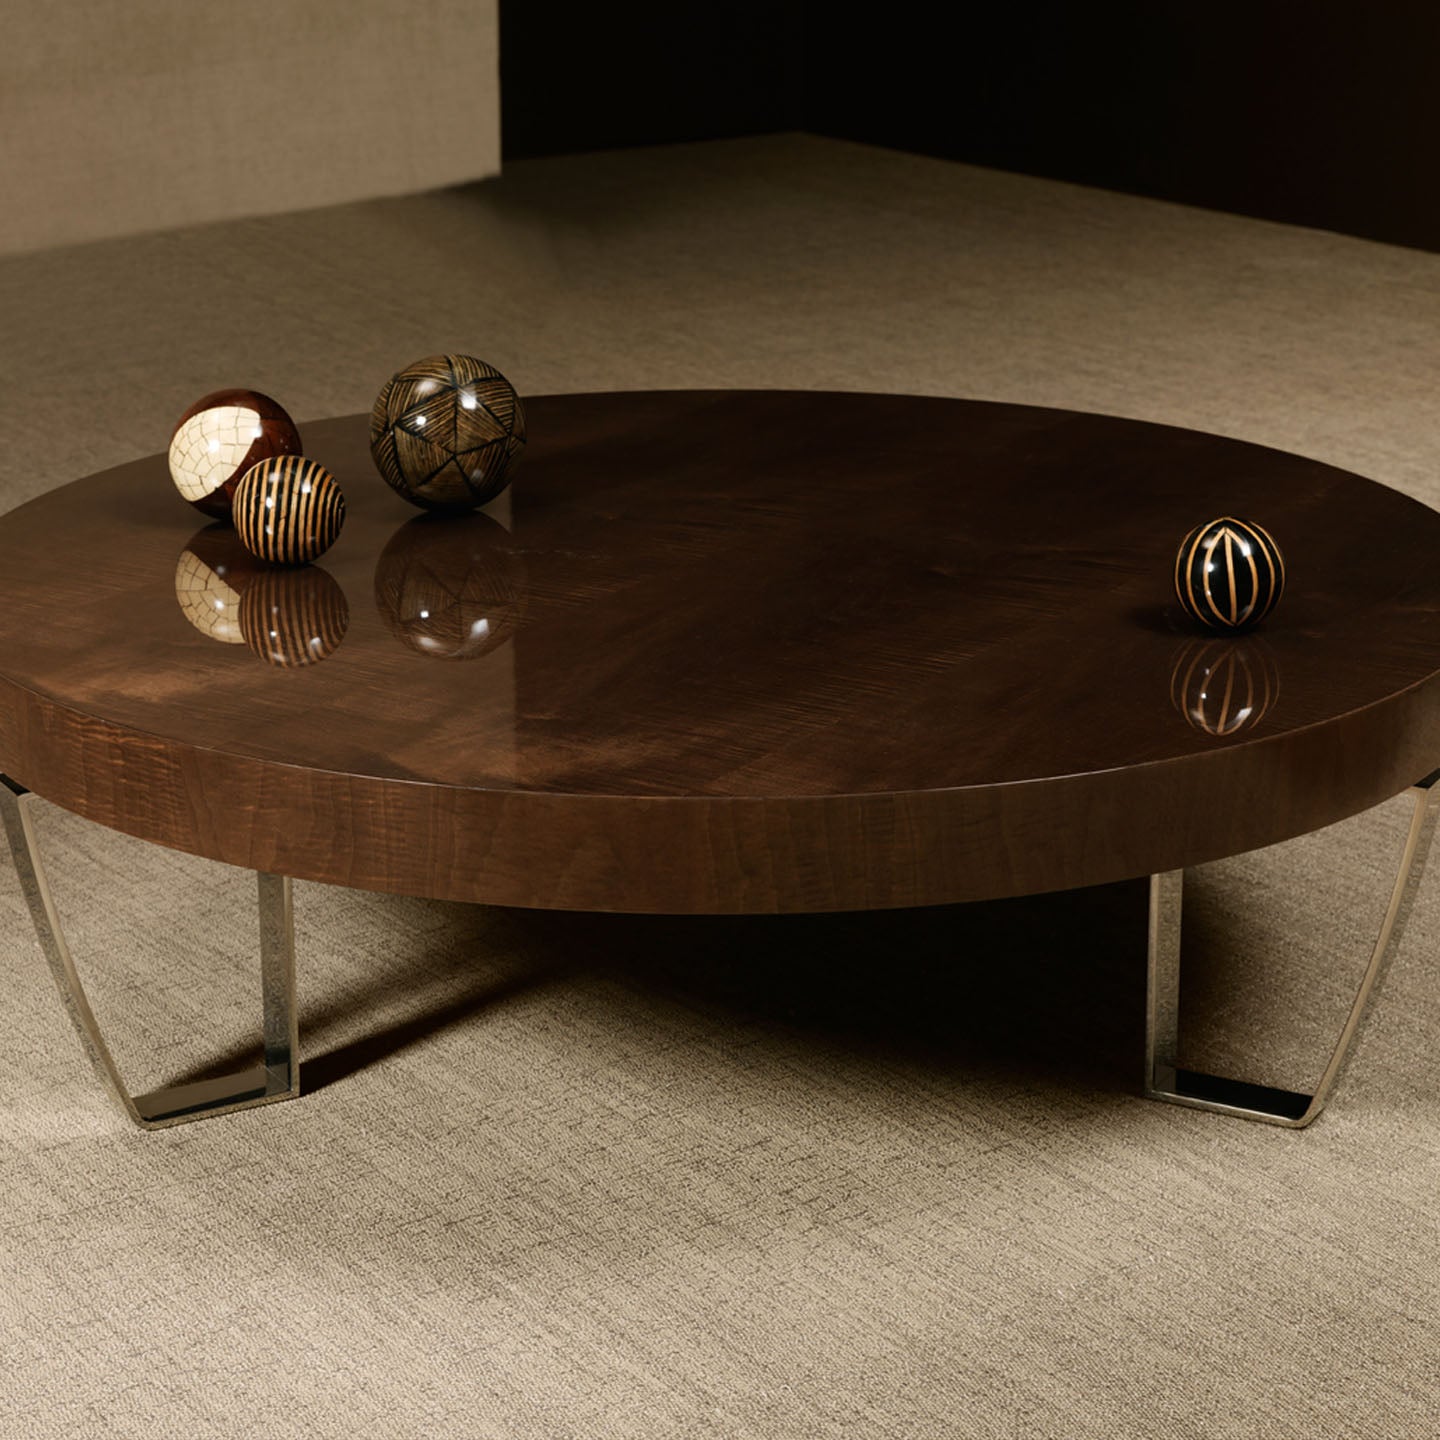 RED-CARPET-round-coffee-table1